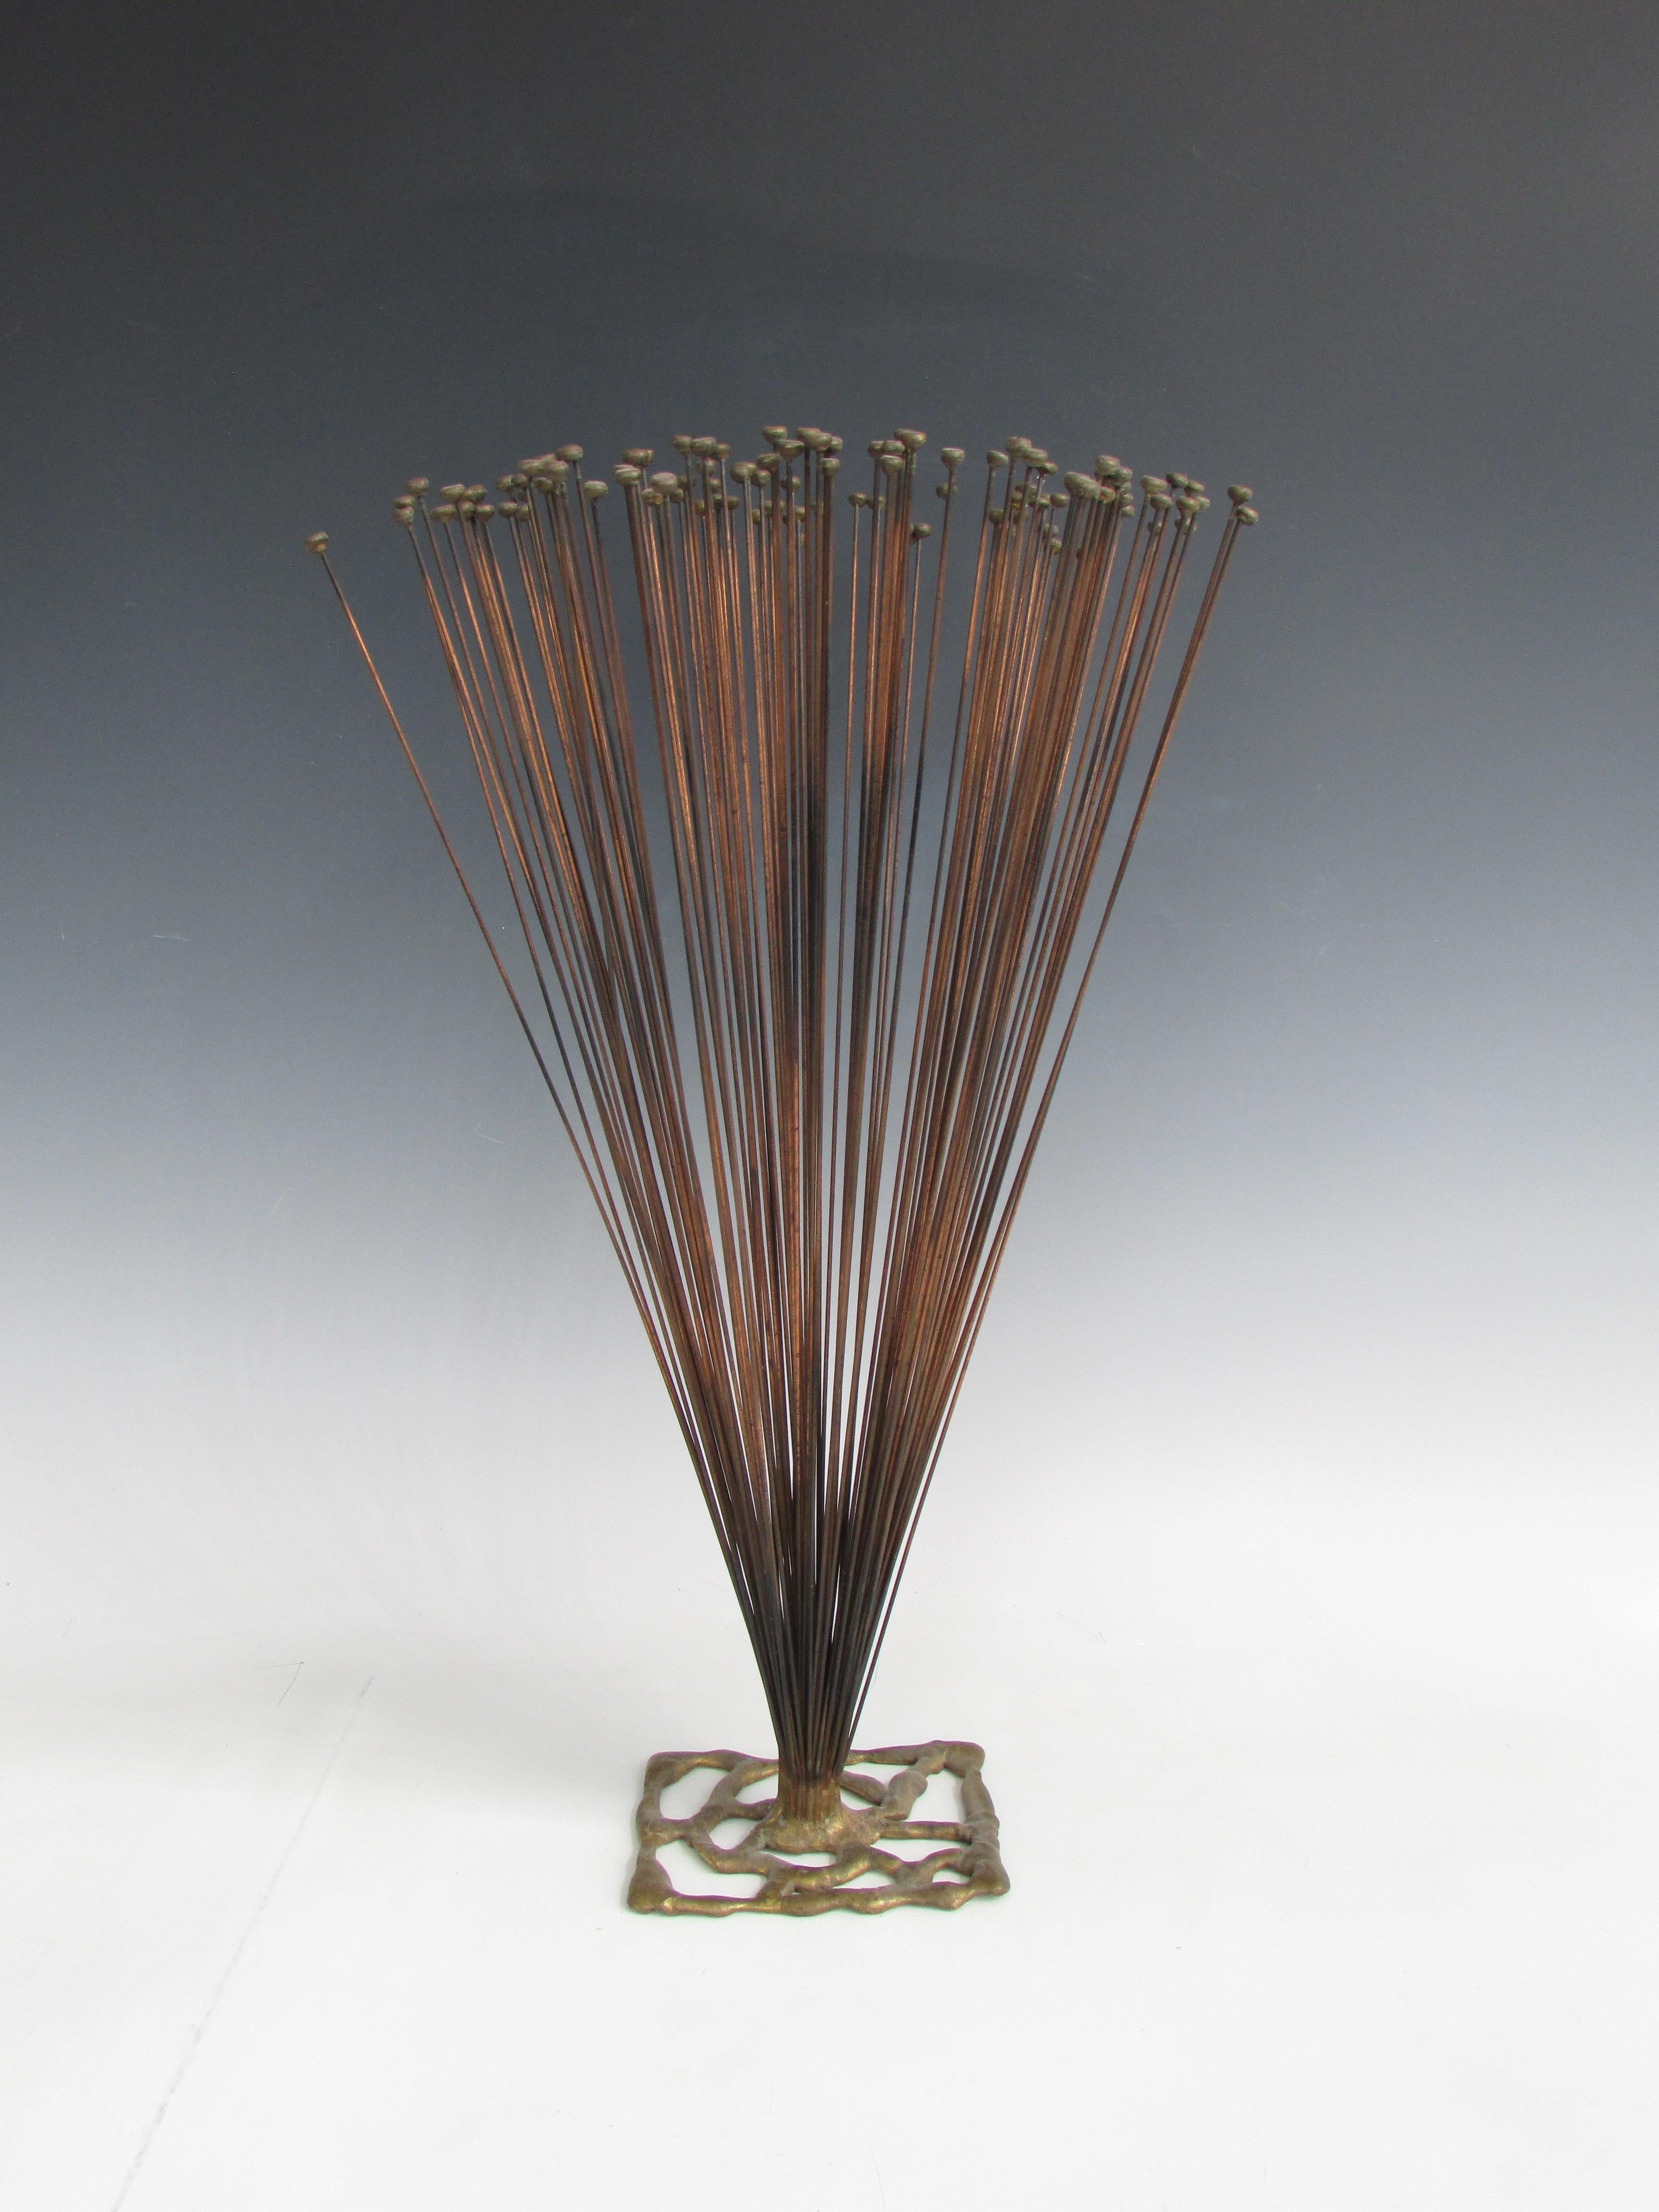 Multiple steel rods set in free form brazed brass base. Each rod topped with melted brass droplet . Not quite but very reminiscent of Harry Bertoias work. Under vibration rods do have Kinetic movement.